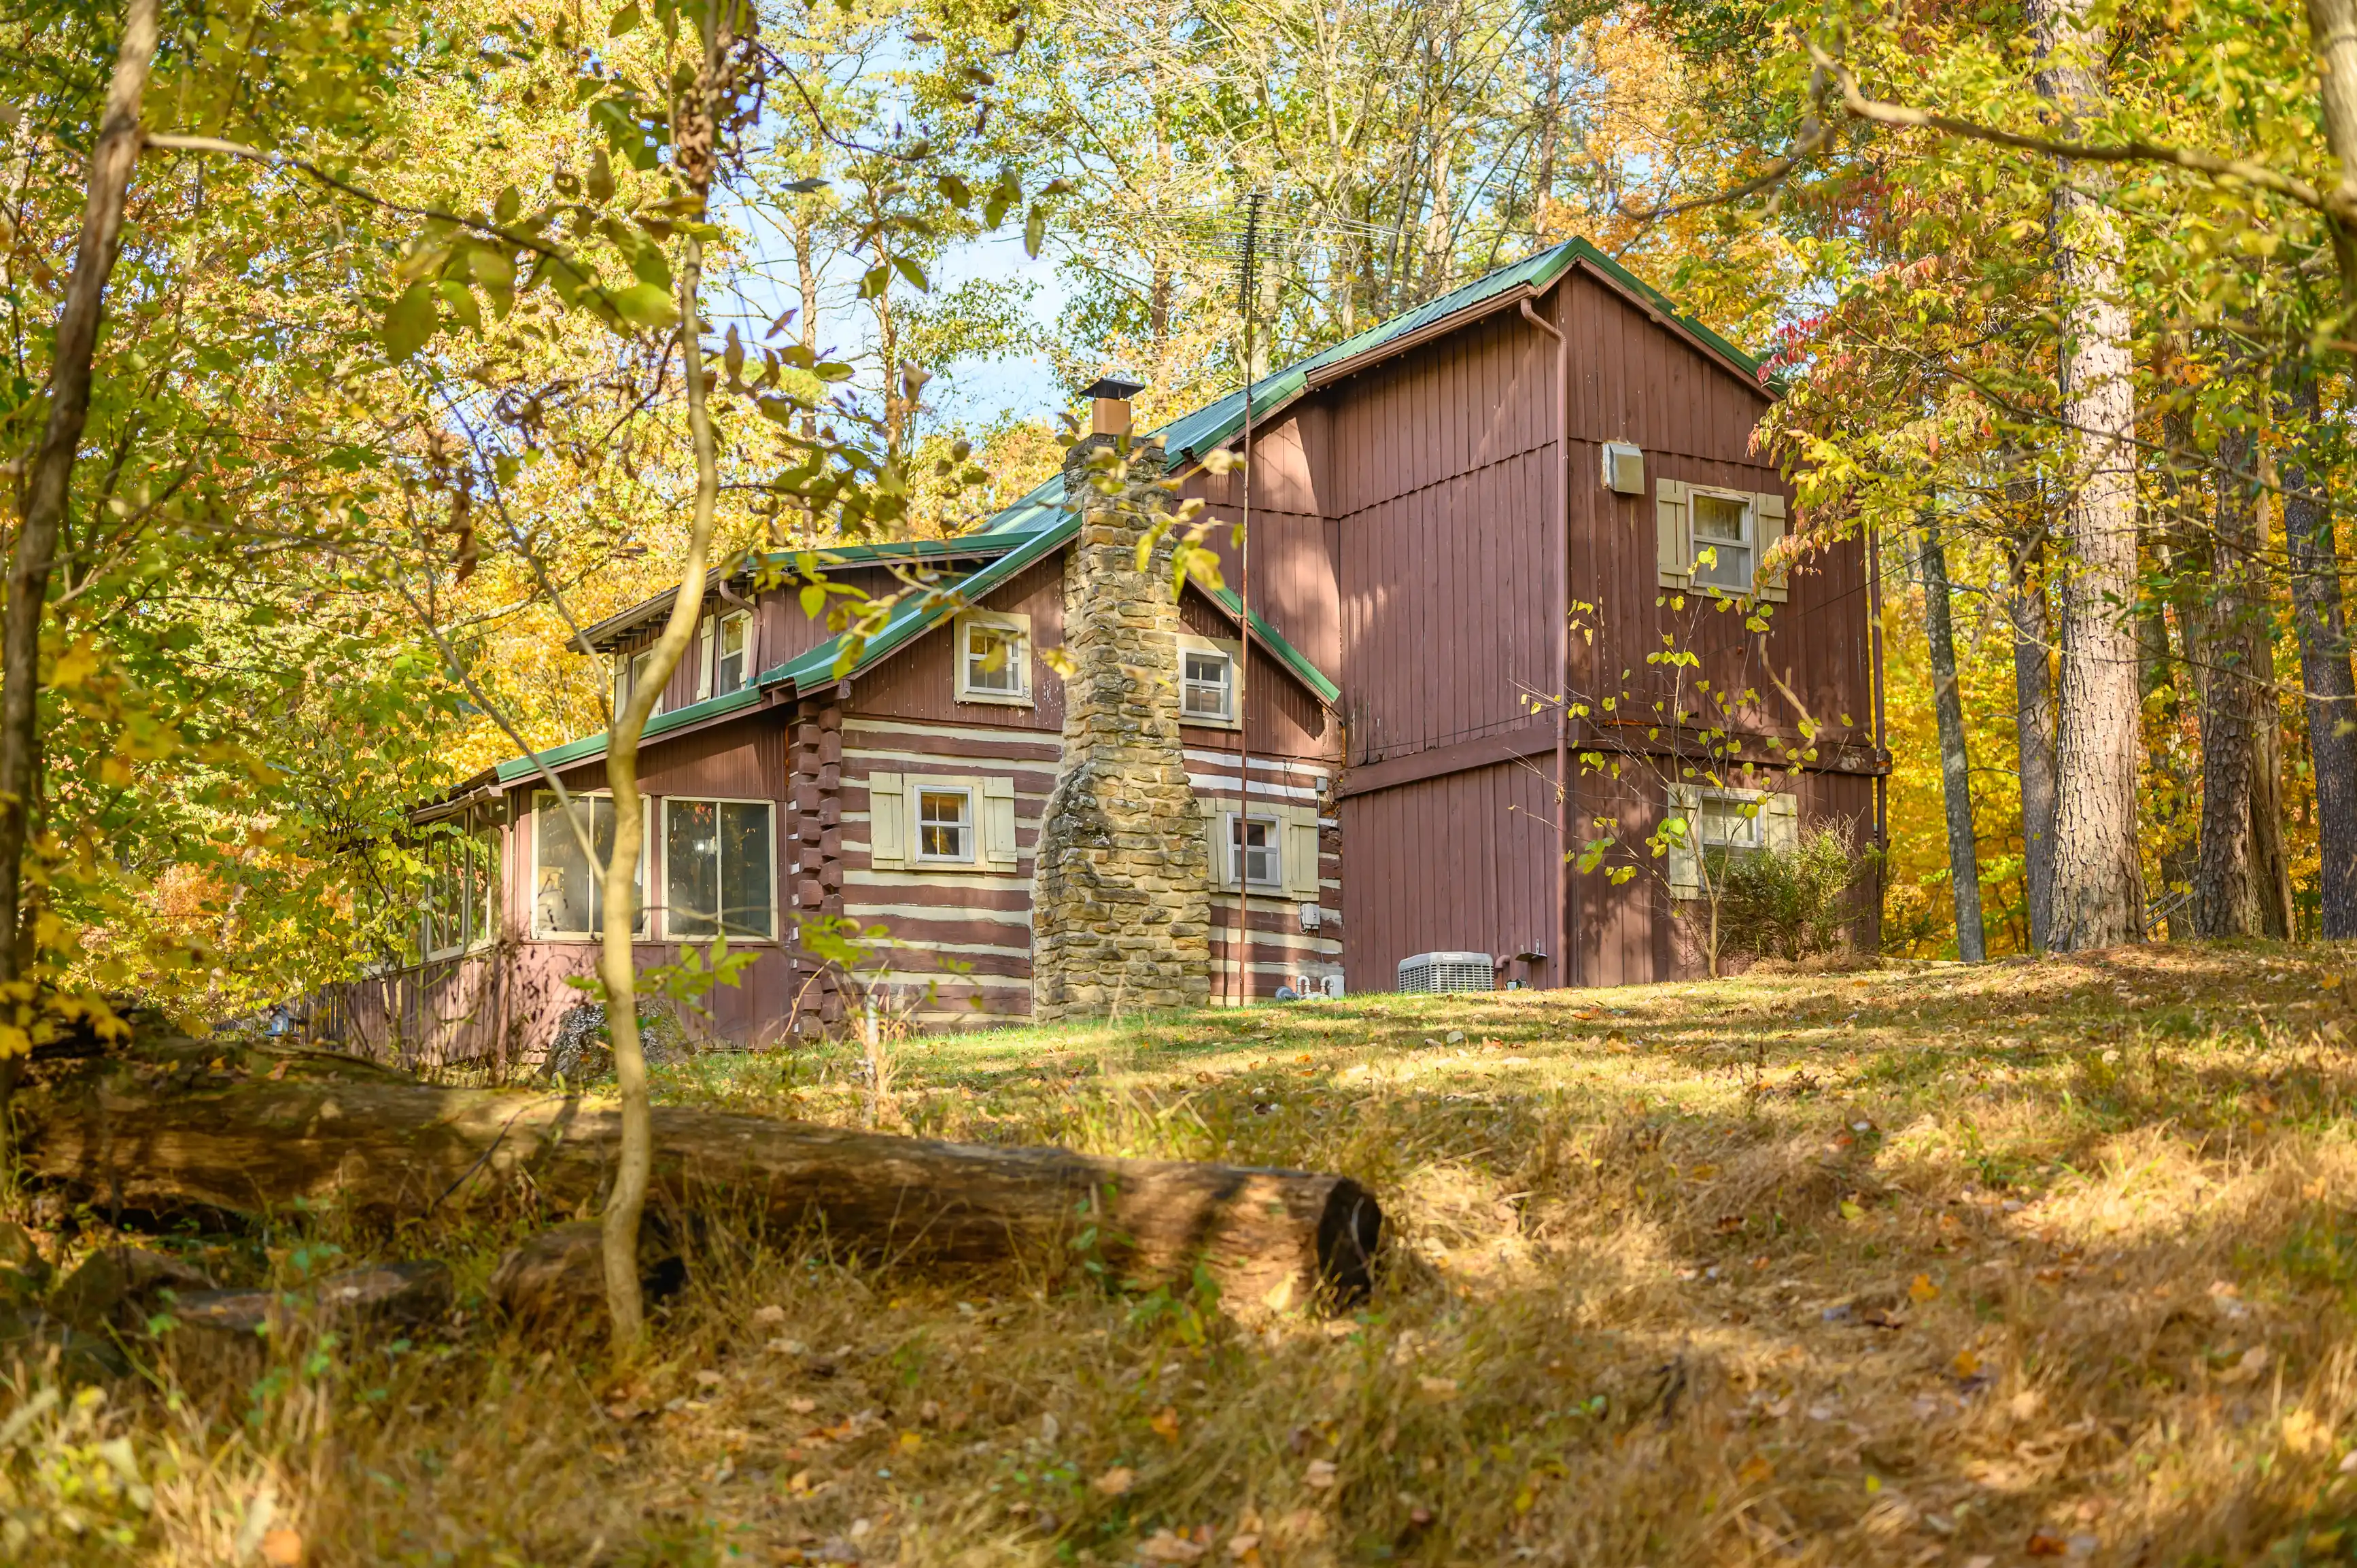 Rustic cabin surrounded by autumn trees with fallen leaves on the ground.